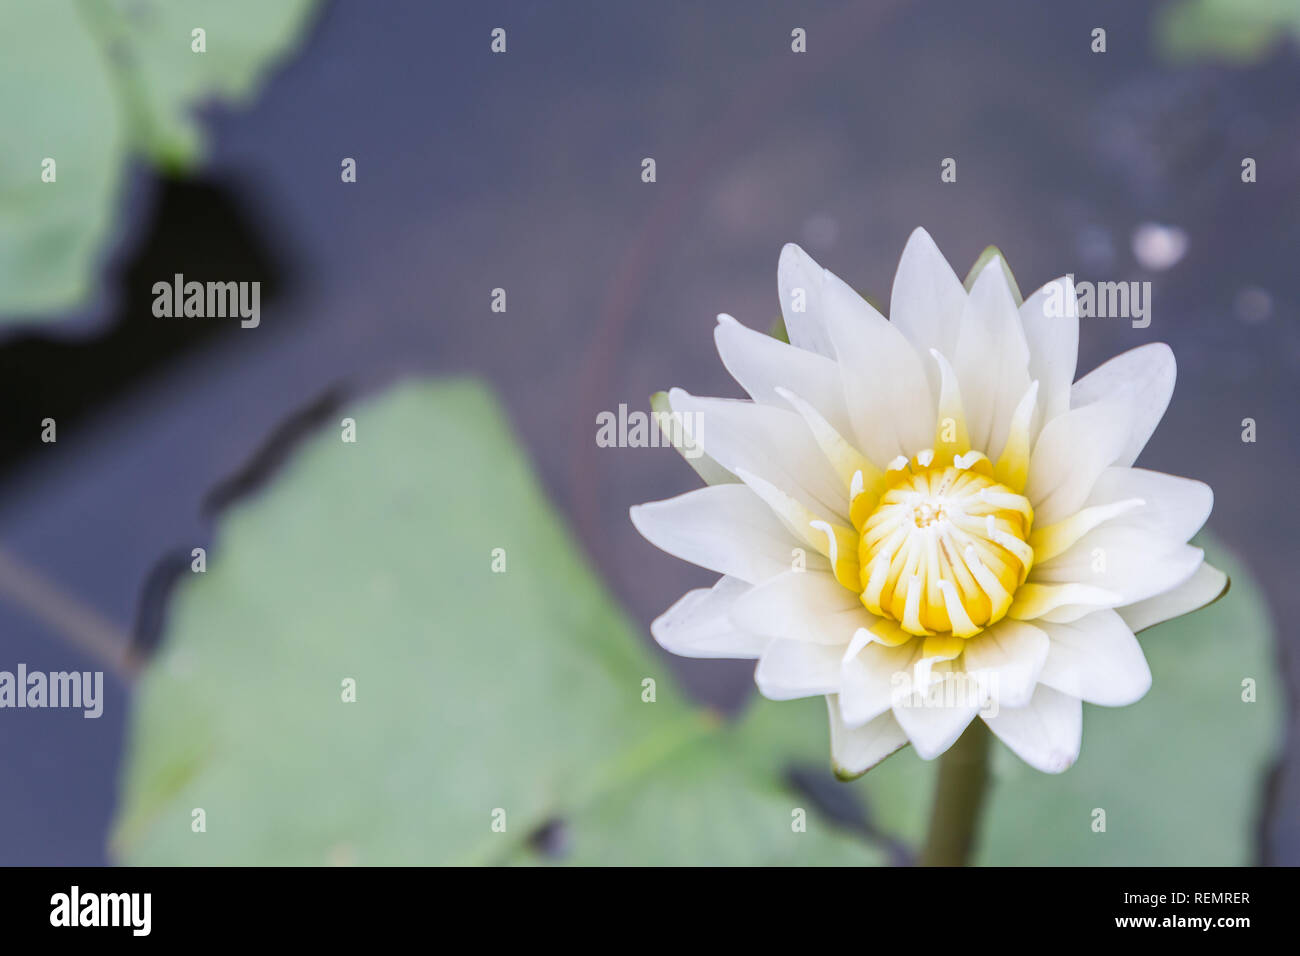 Lotus flower or water lily flower blooming with green leaves background in the pond at sunny summer or spring day. Nymphaea water lily. Stock Photo